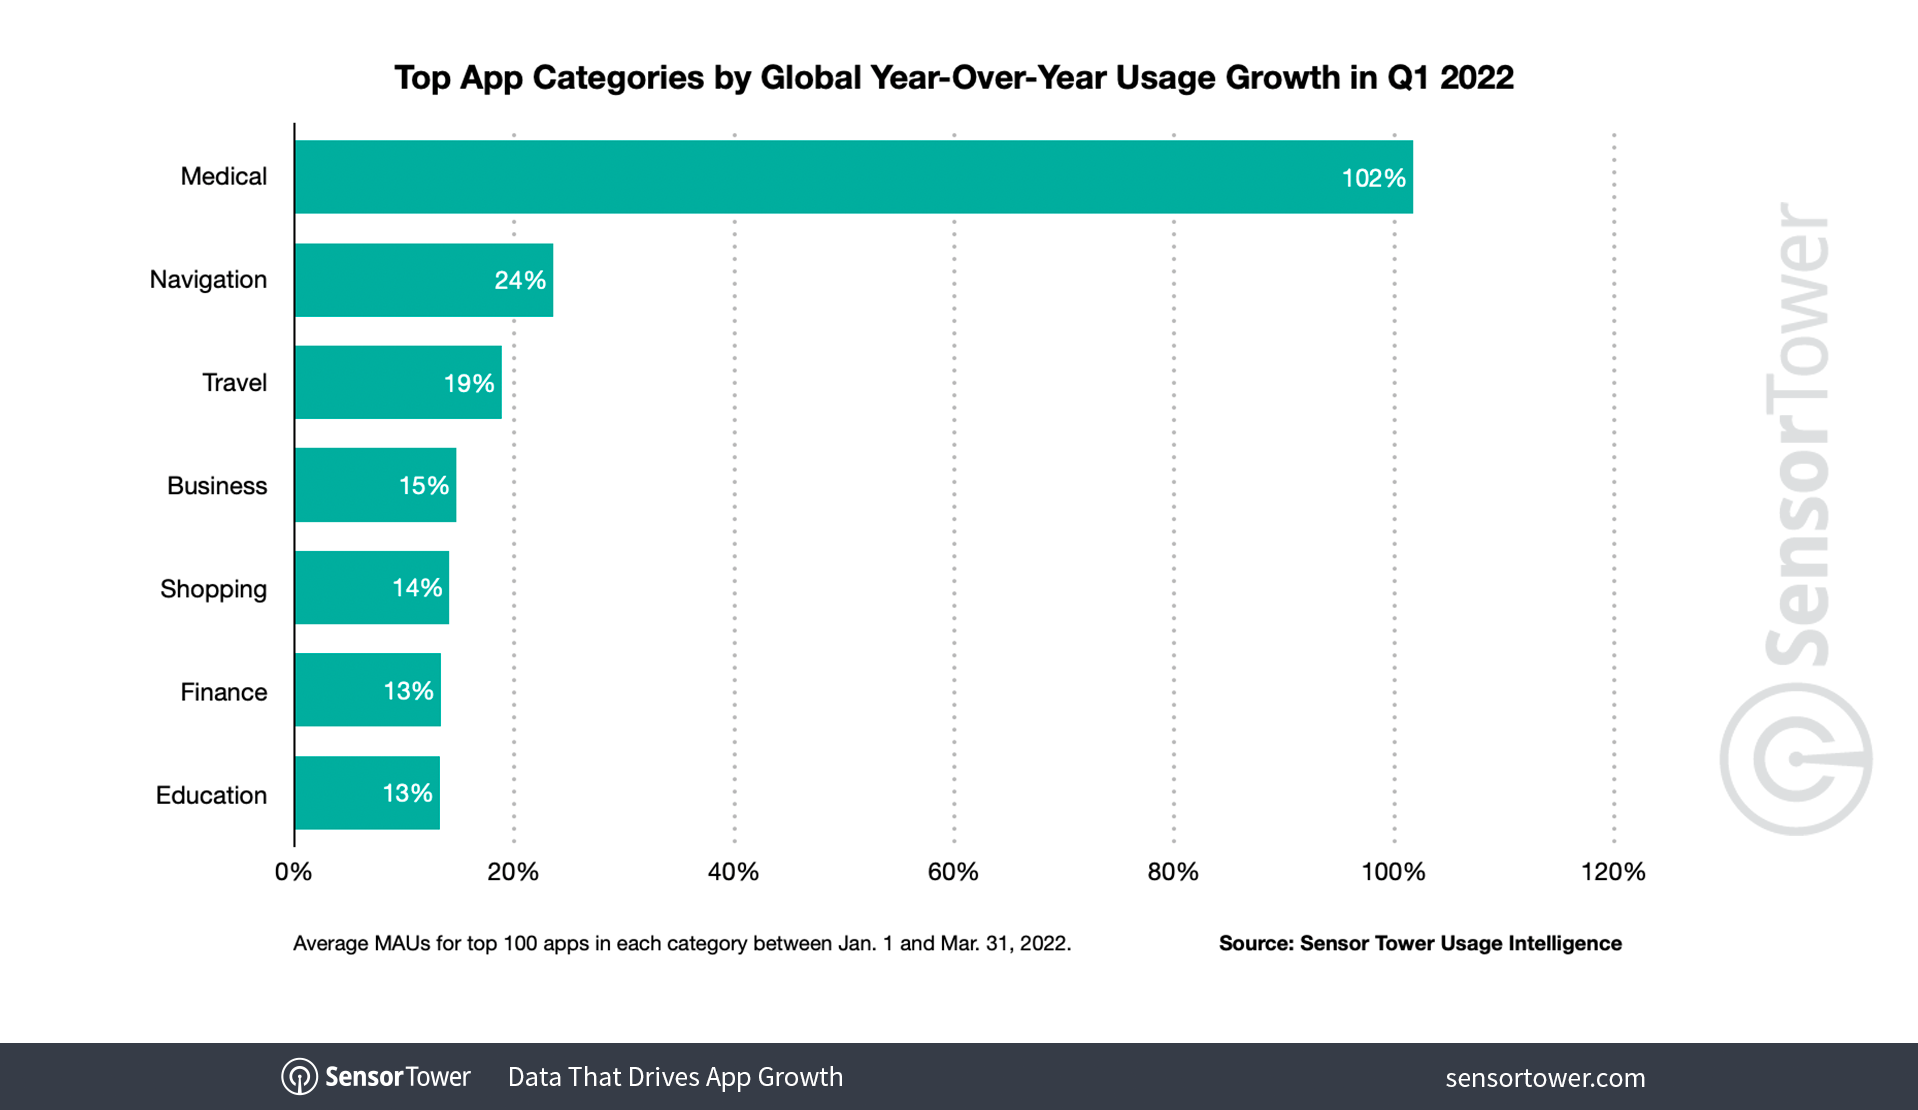 Global App Revenue Growth Was Flat in Q1 2022, While Usage Grew Nearly 5%